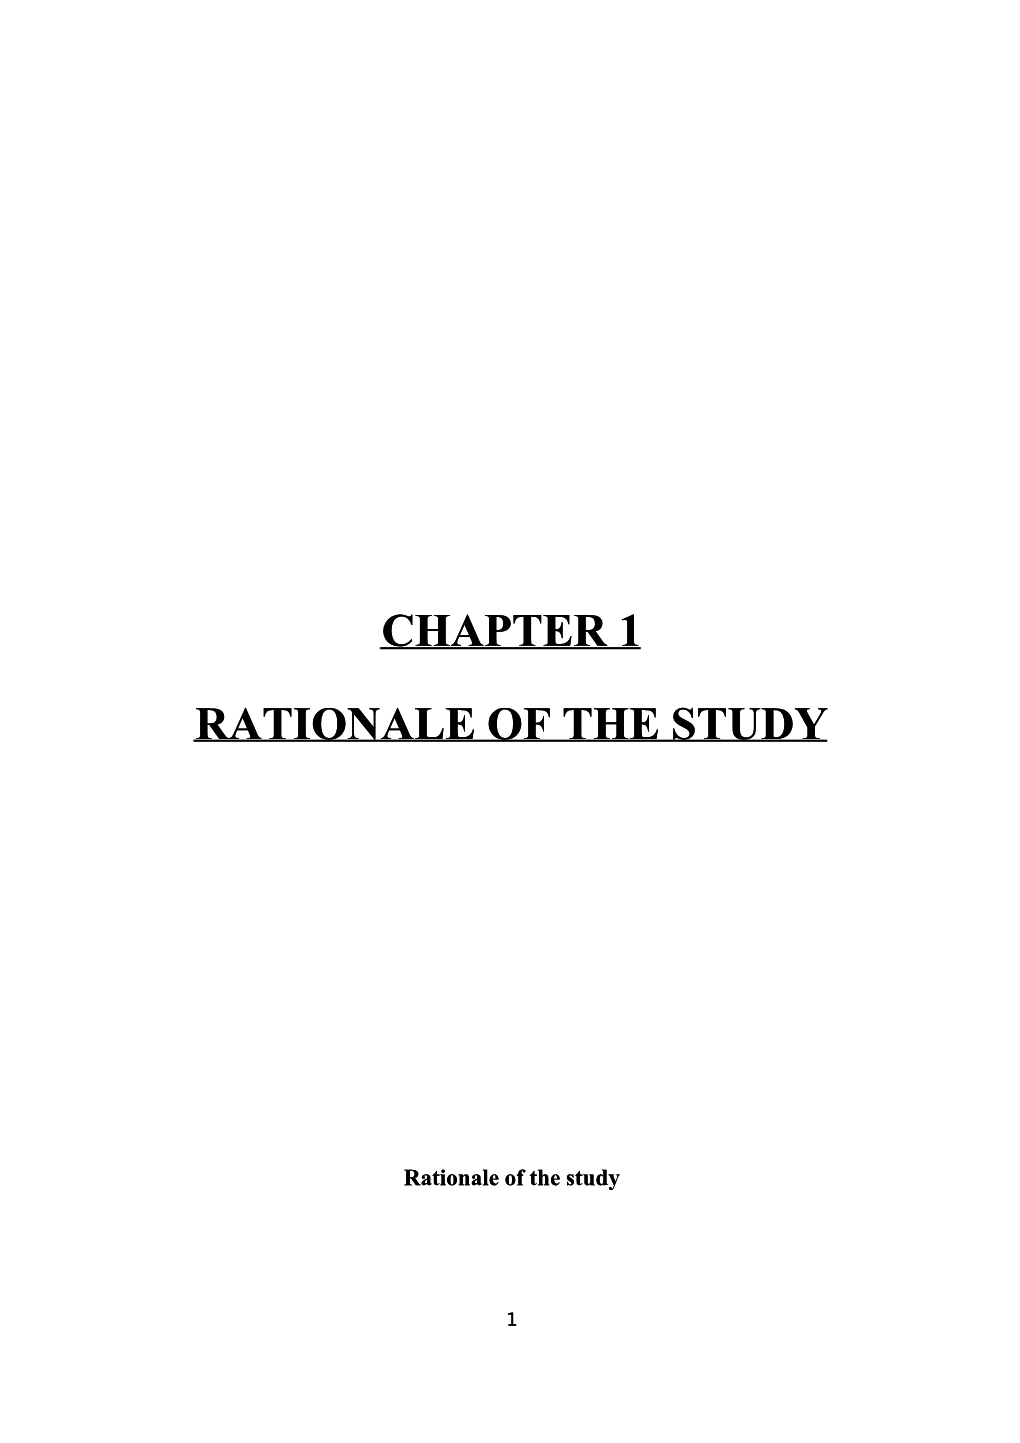 Chapter 1 Rationale of the Study